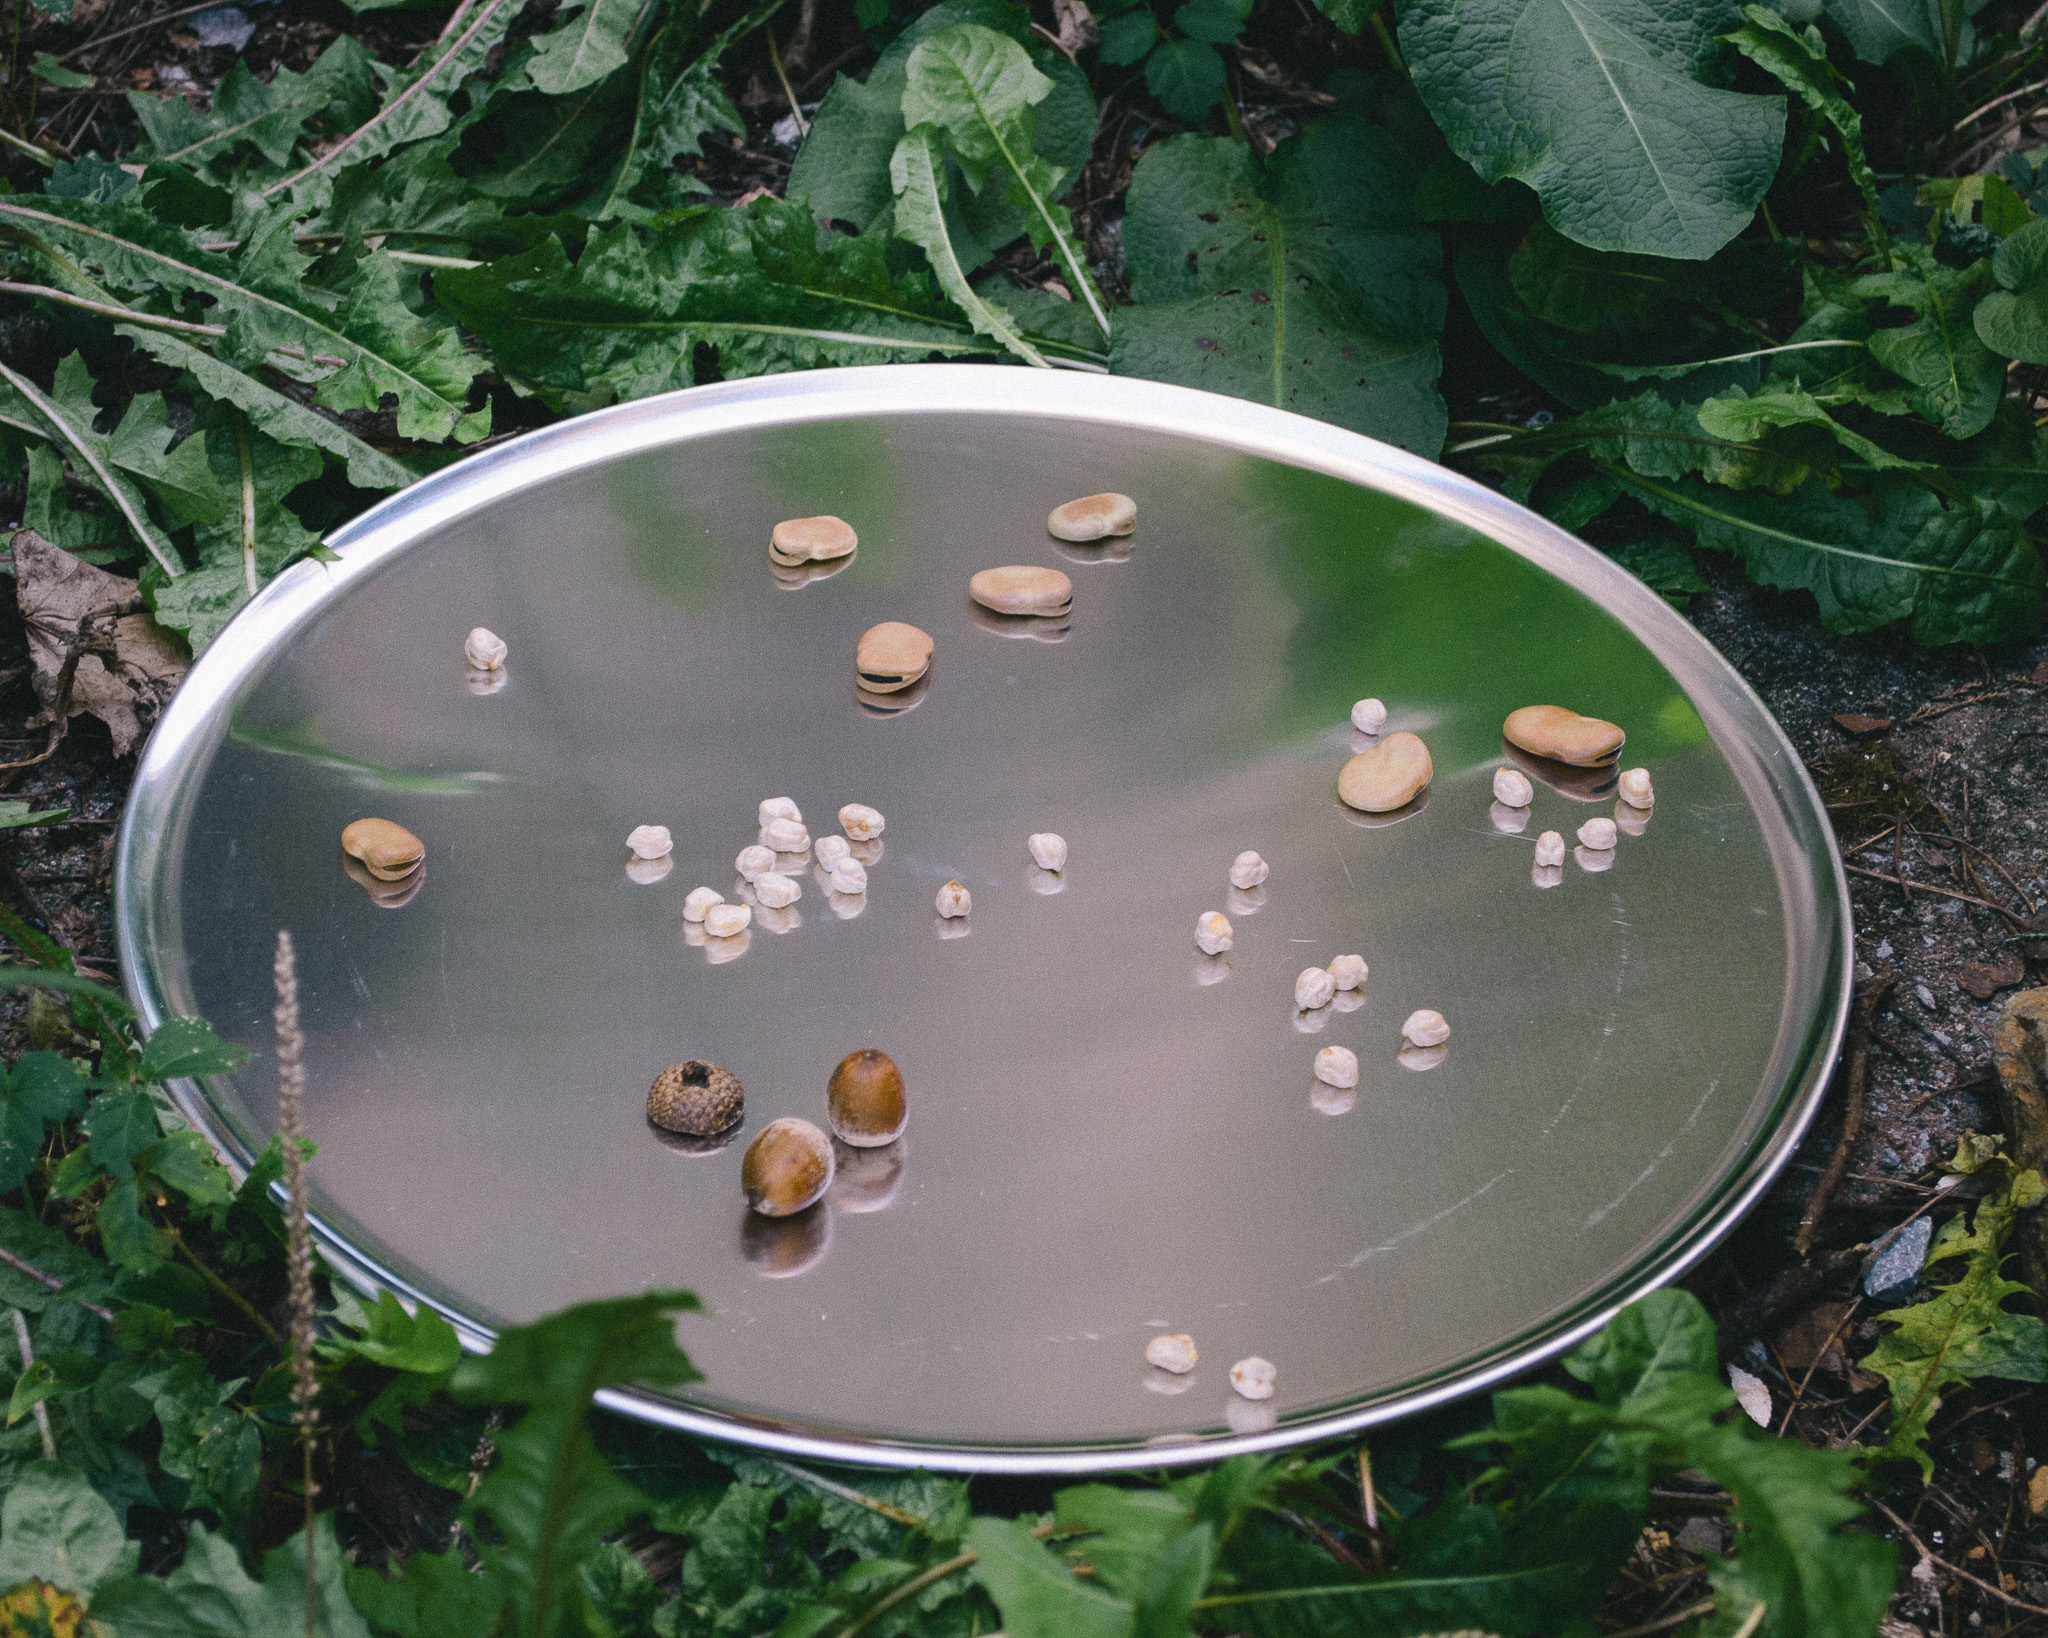 Acorns and corn kernels sit on a mirrored tray set in a bed of leaves of weeds.